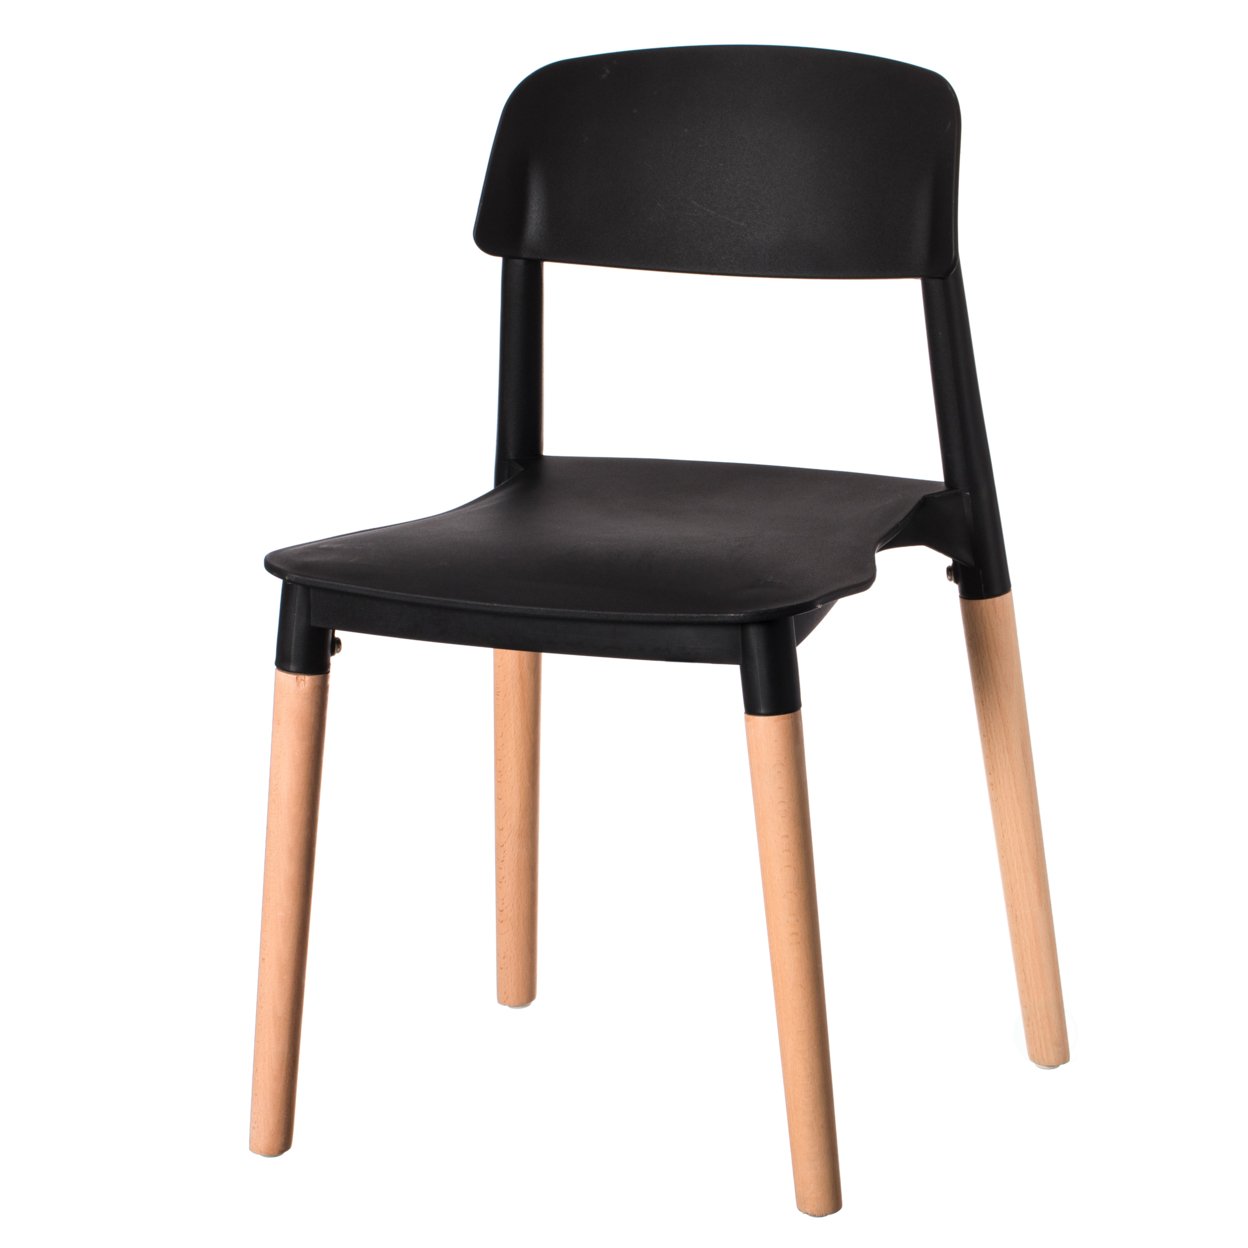 Modern Plastic Dining Chair Open Back With Beech Wood Legs - Single Yellow